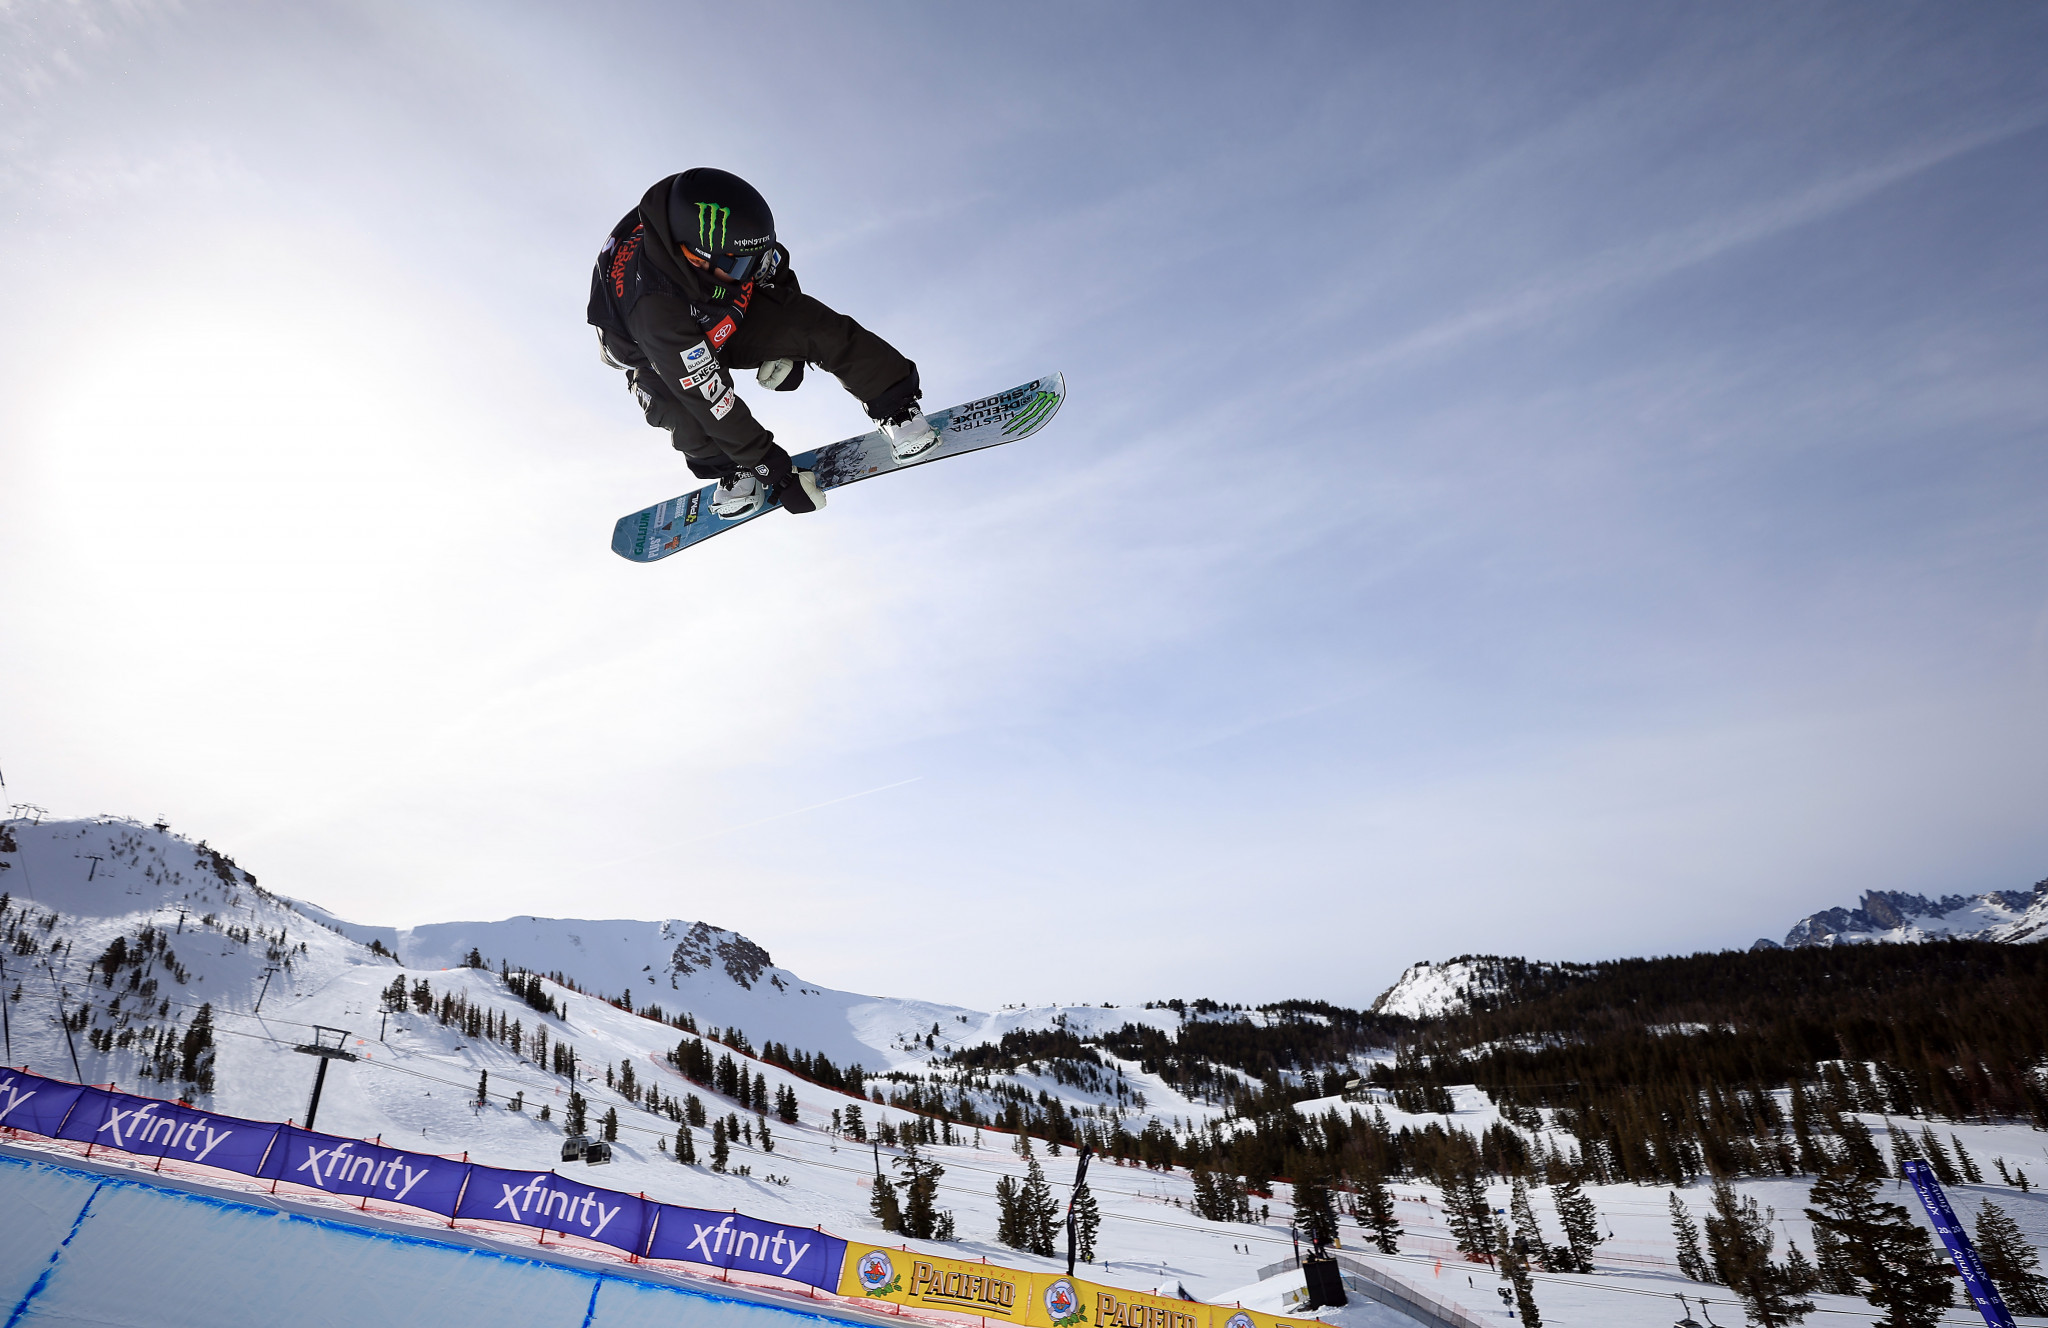 Yuto Totsuka topped men's snowboard halfpipe qualifying at Mammoth Mountain ©Getty Images